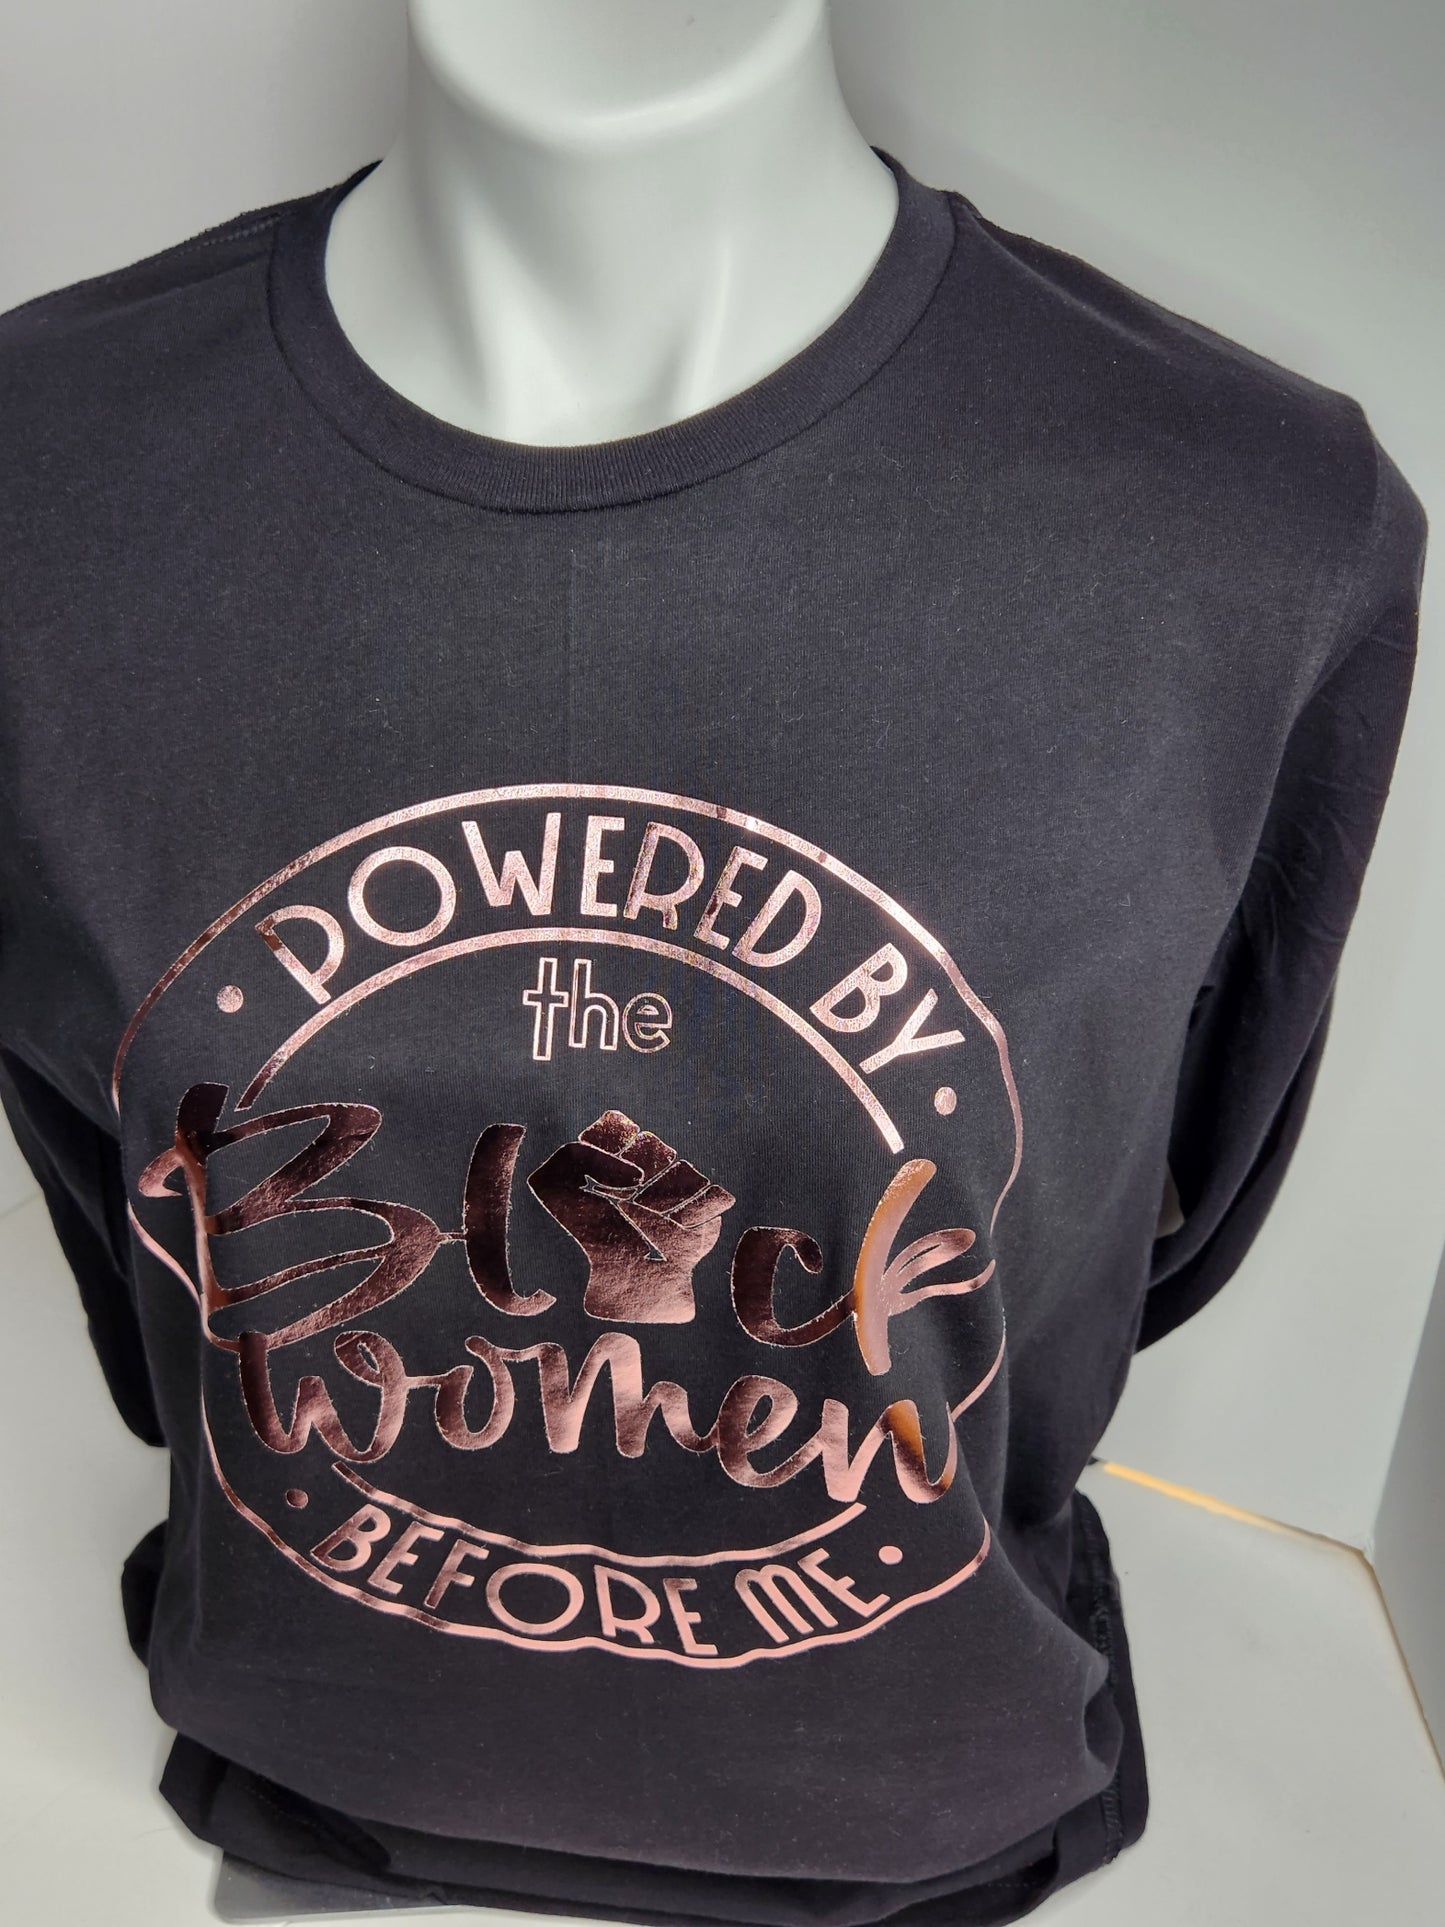 Powered by the Black Women Before Me tee